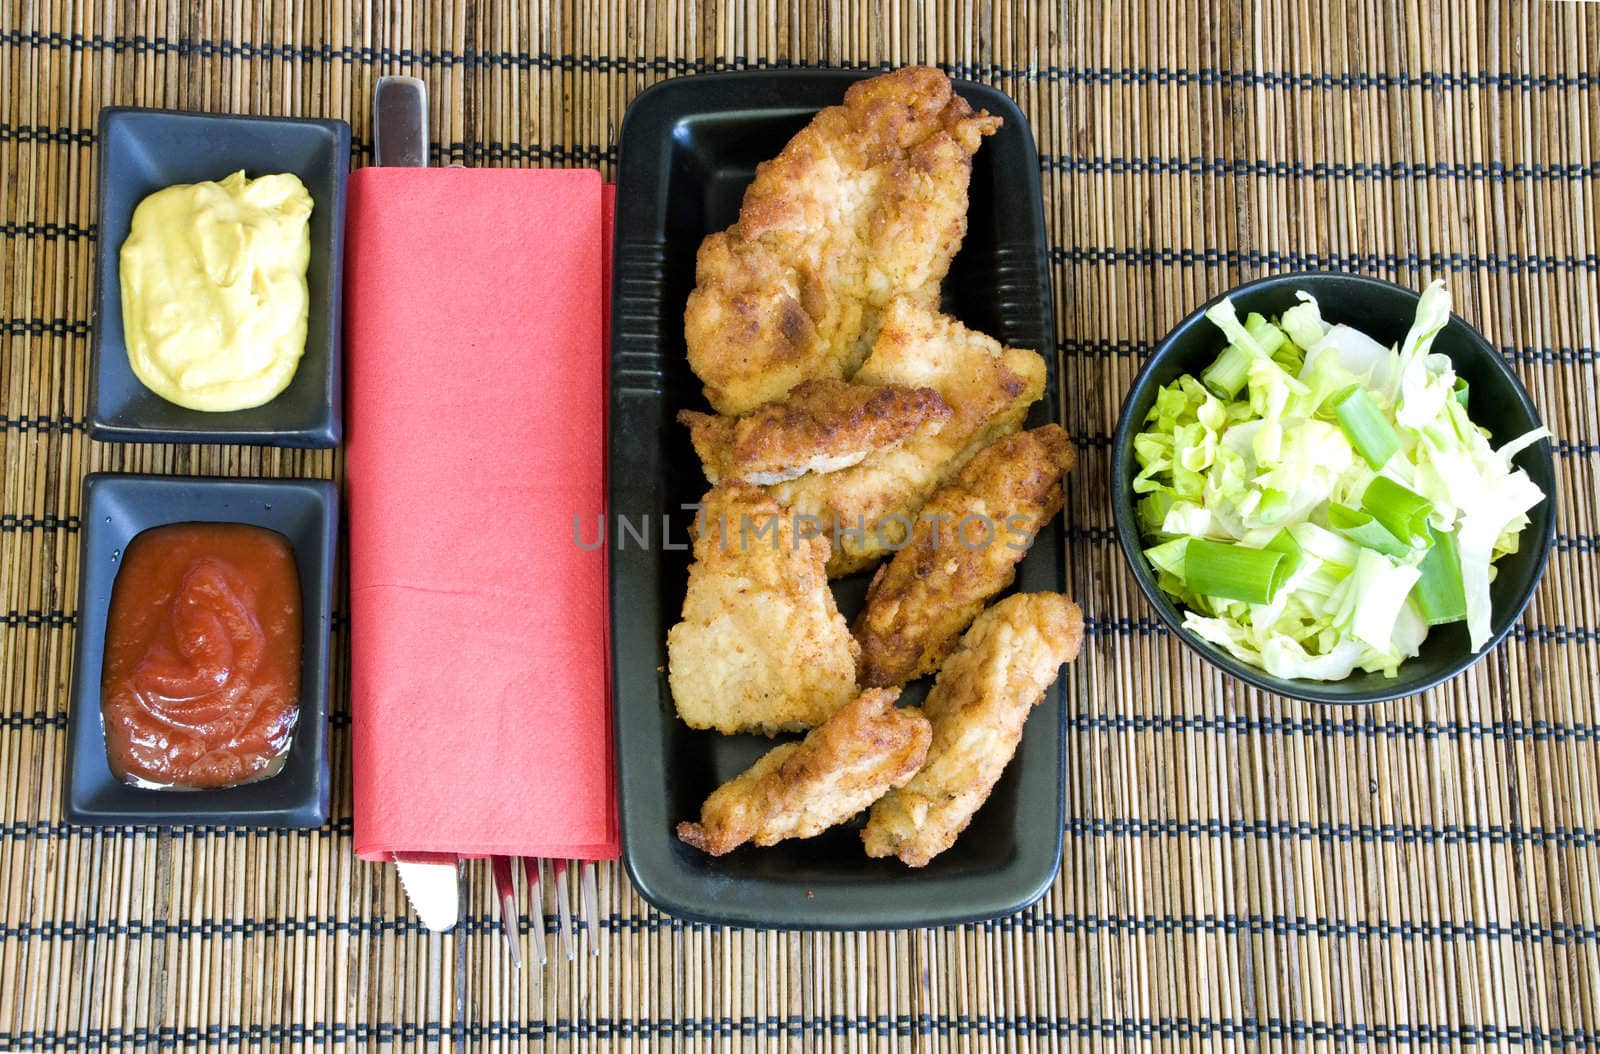 chicken fingers and light salad for lunch